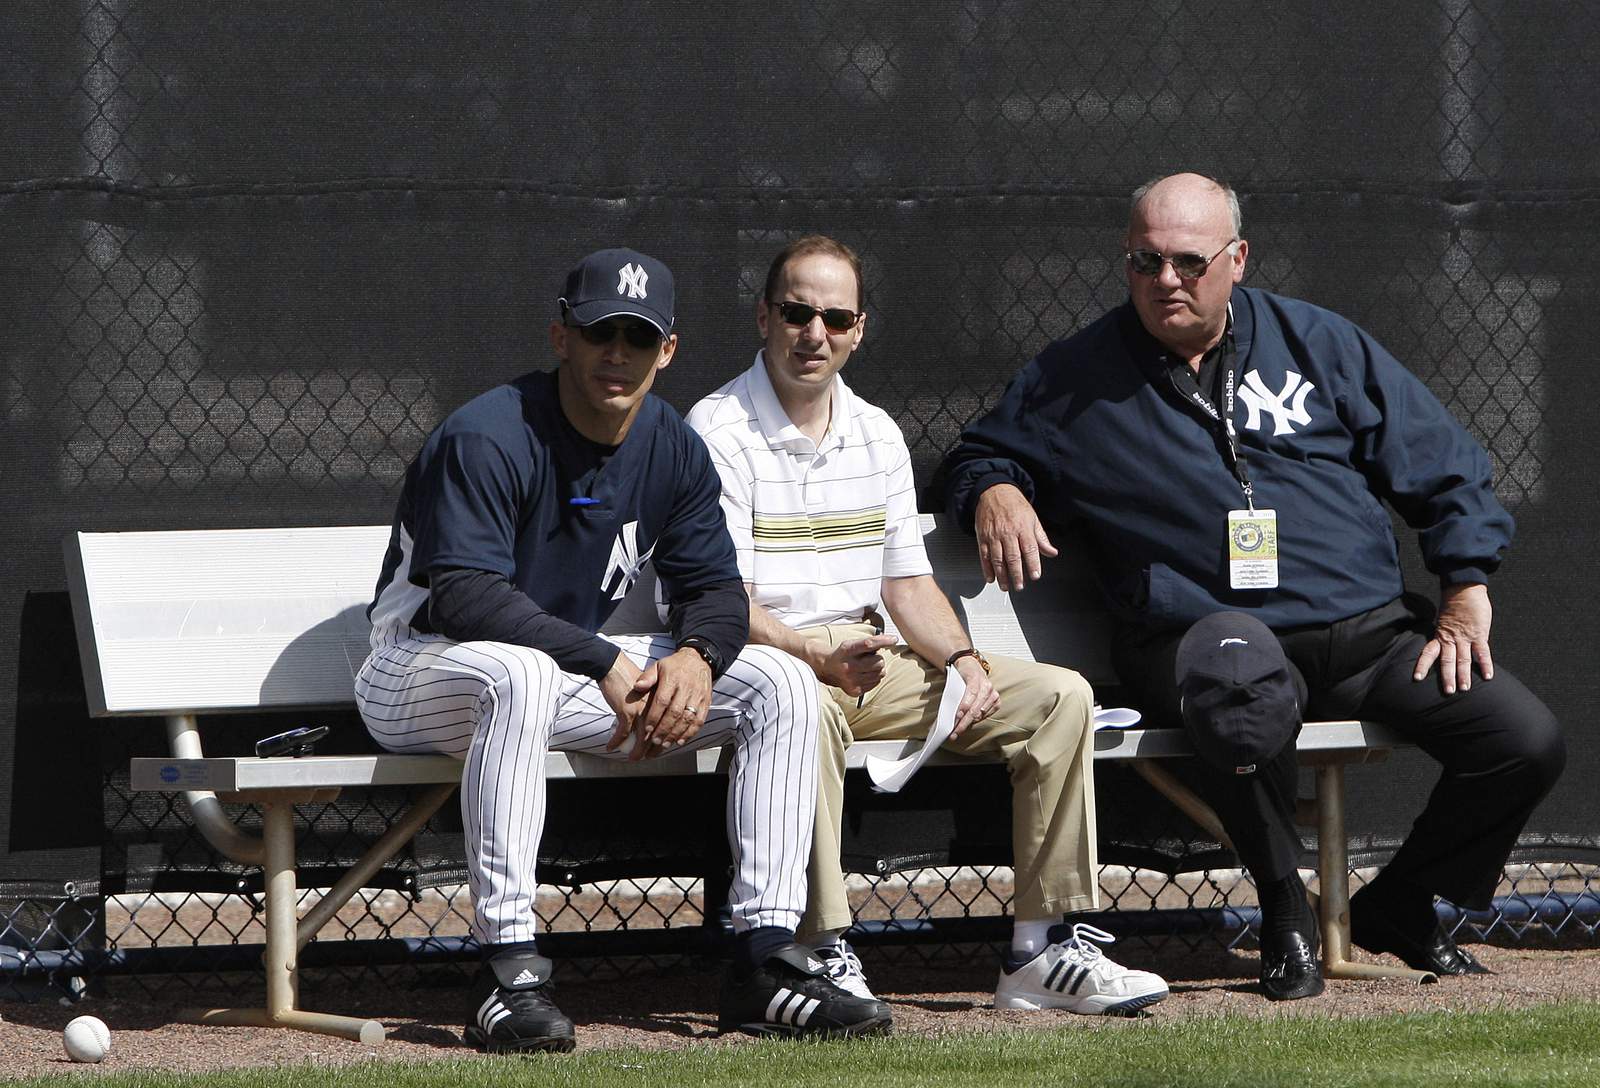 Jeter returns as Yankees honor 1998 team at Old-Timers' Day, Boone booed by  some